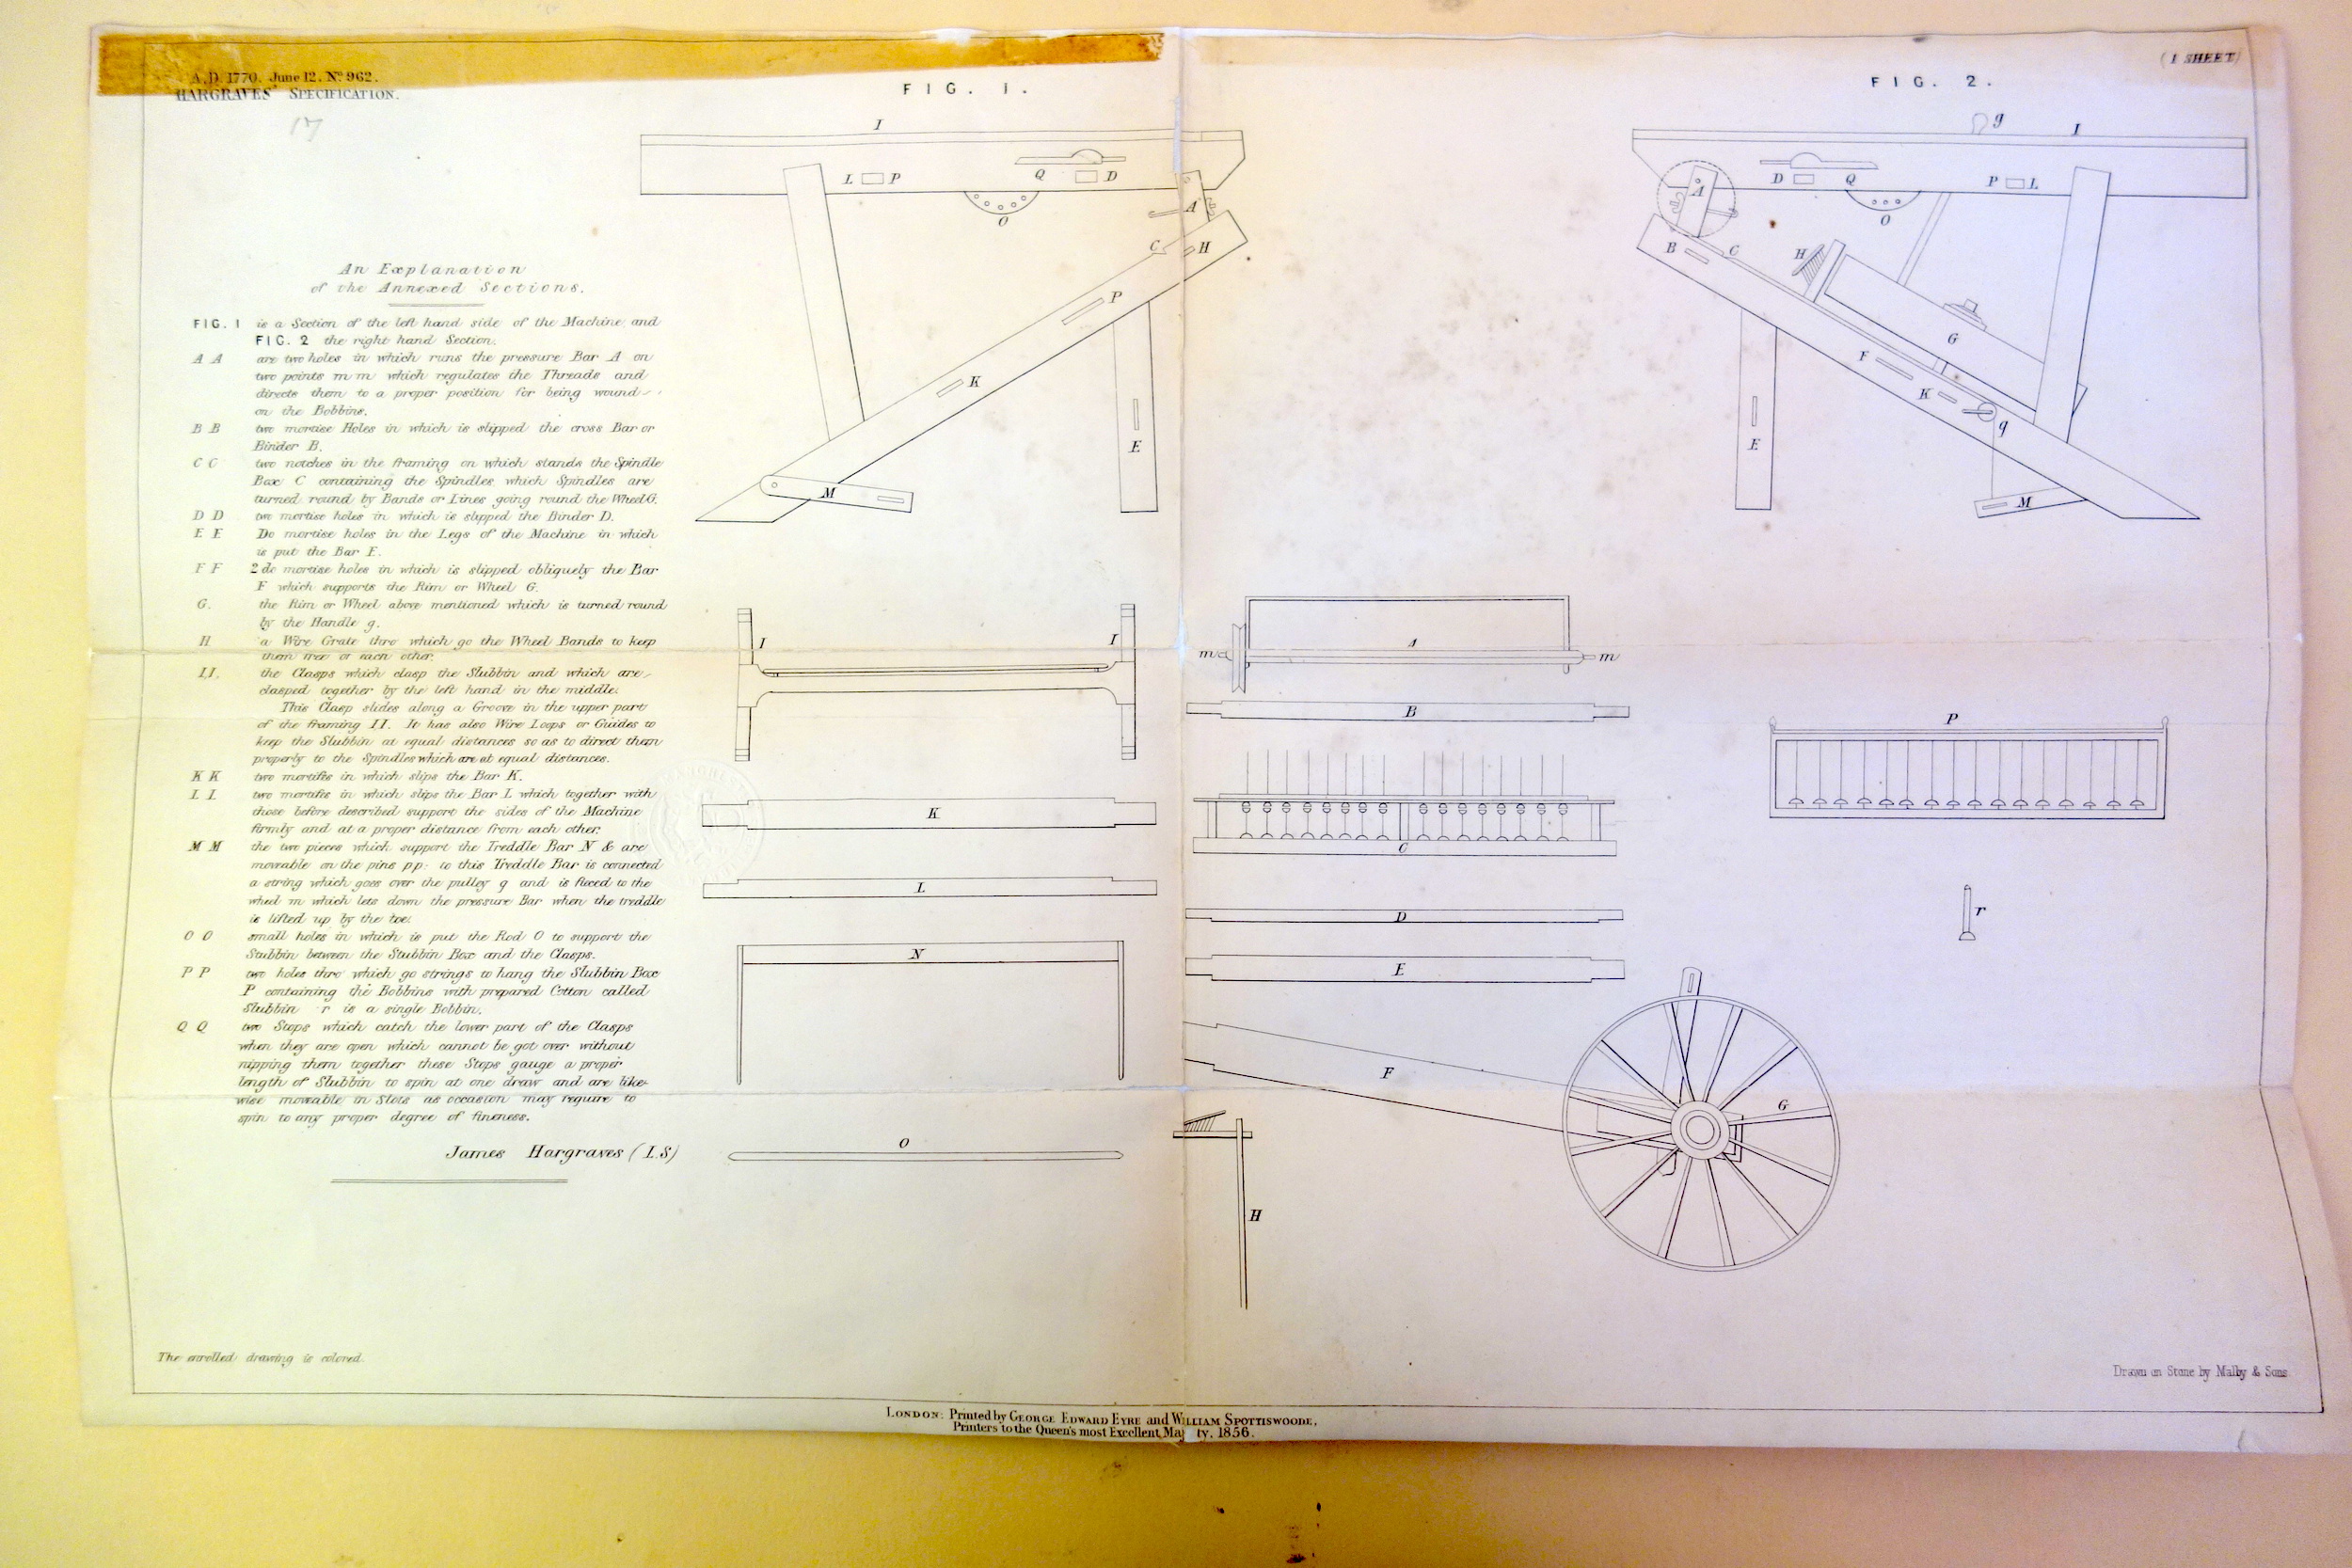 Hargraves patent drawings